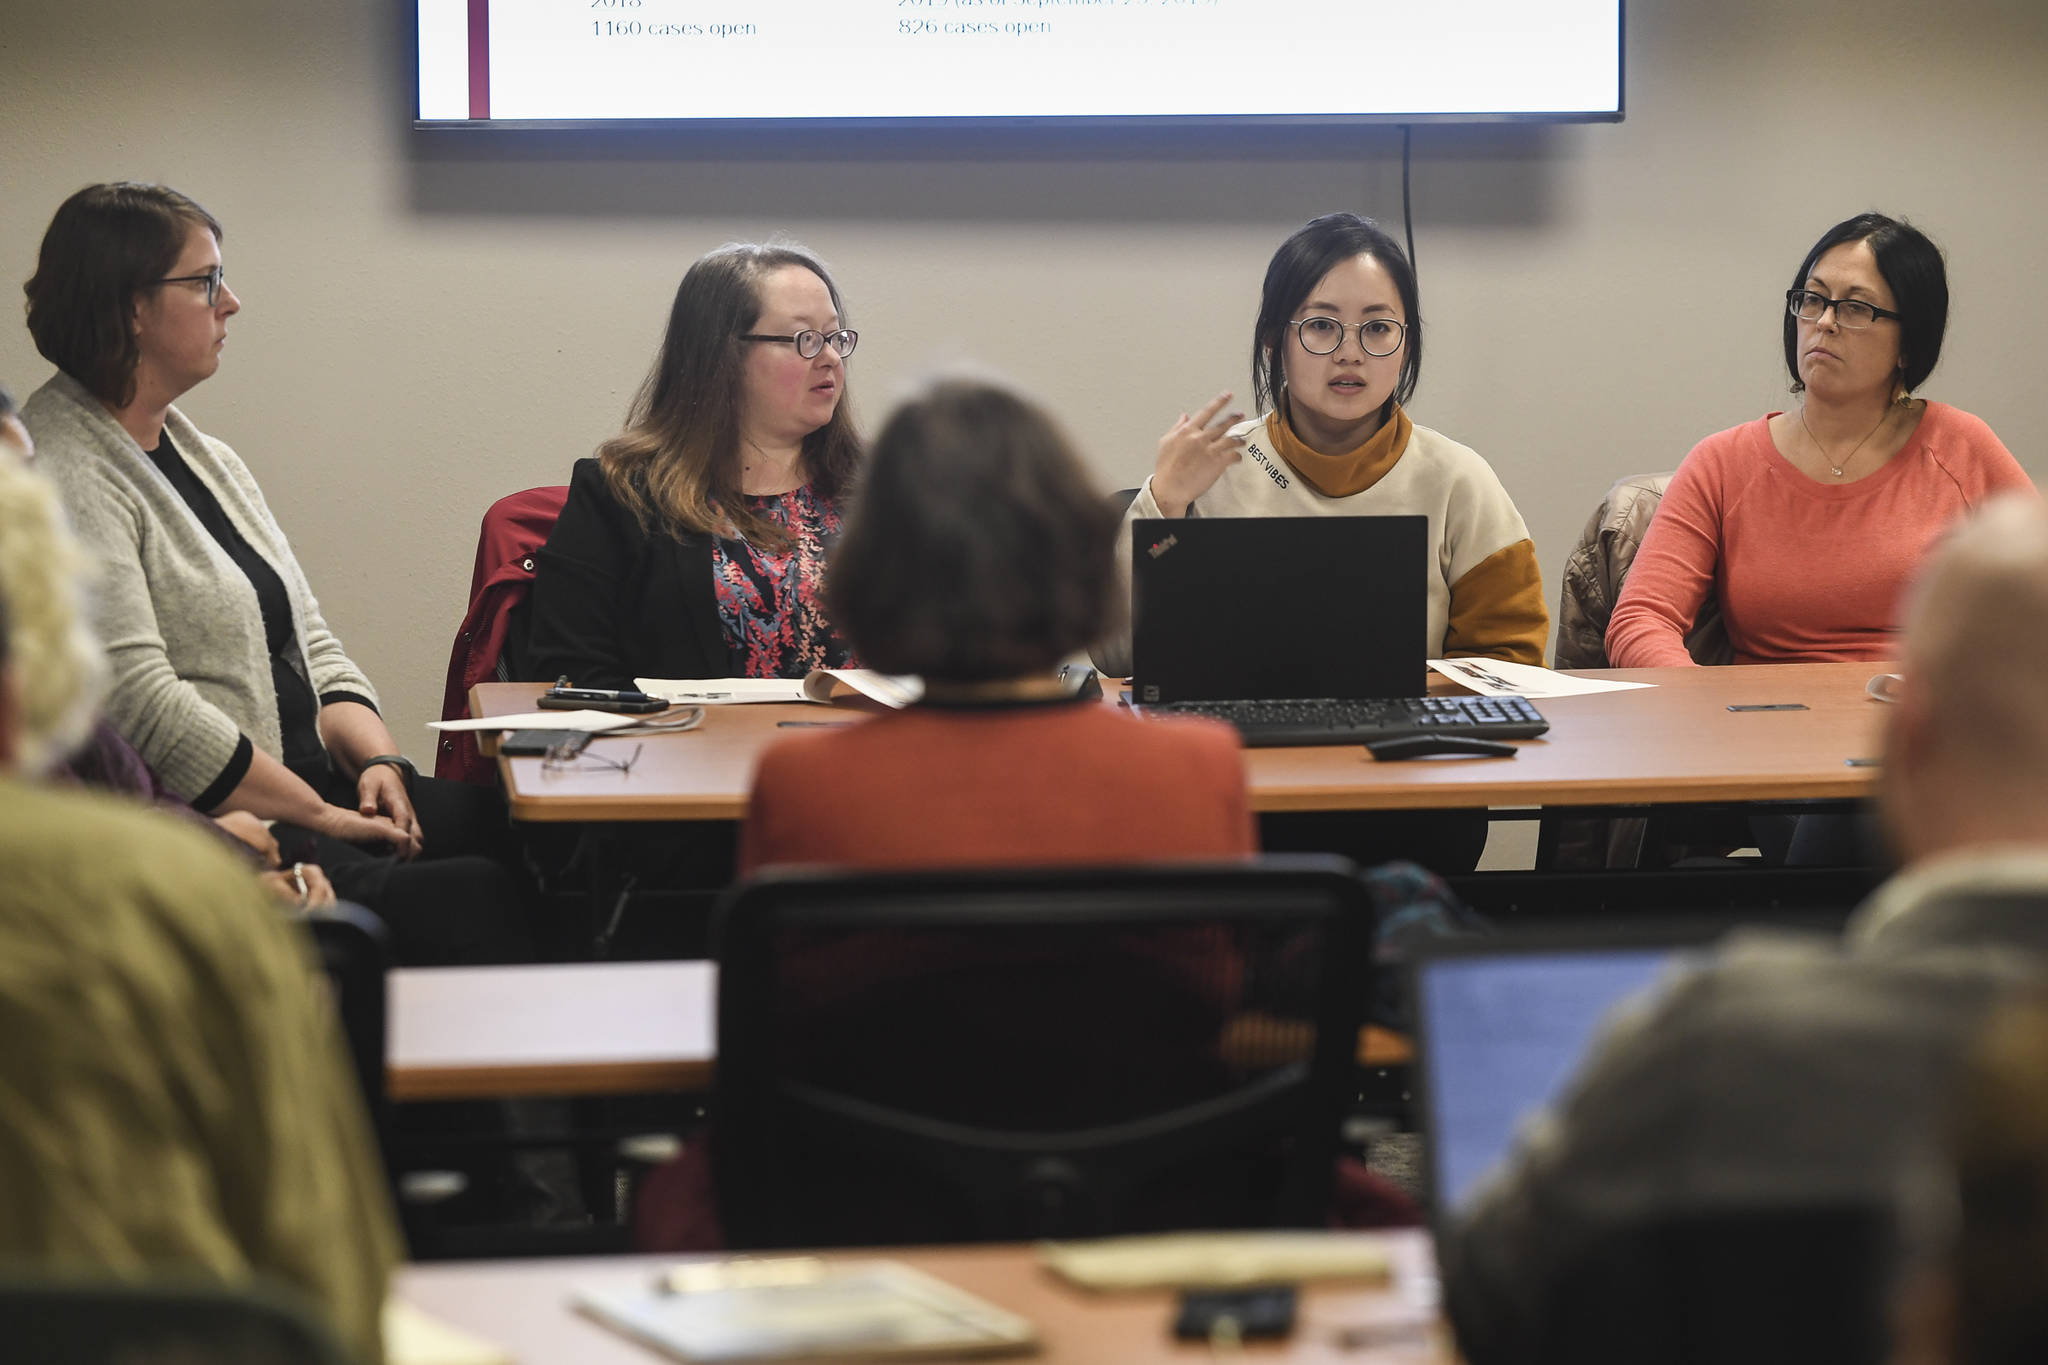 Defense attorney Grace Lee, second from right, speaks during a presentation on Juneau’s Therapeutic Court at Juneau Alliance For Mental Health Inc (JAMHI) on Tuesday, Nov. 5, 2019. CBJ Prosecuter Emily Wright, left, Assistant District Attorney Dara Gibson, second from left, and Probation Officer/Case Manager Autumn Flaningam, right, are also shown and spoke. Inside Passages is a mental health speaker series sponsored by National Alliance on Mental Illness (NAMI) Juneau. (Michael Penn | Juneau Empire)